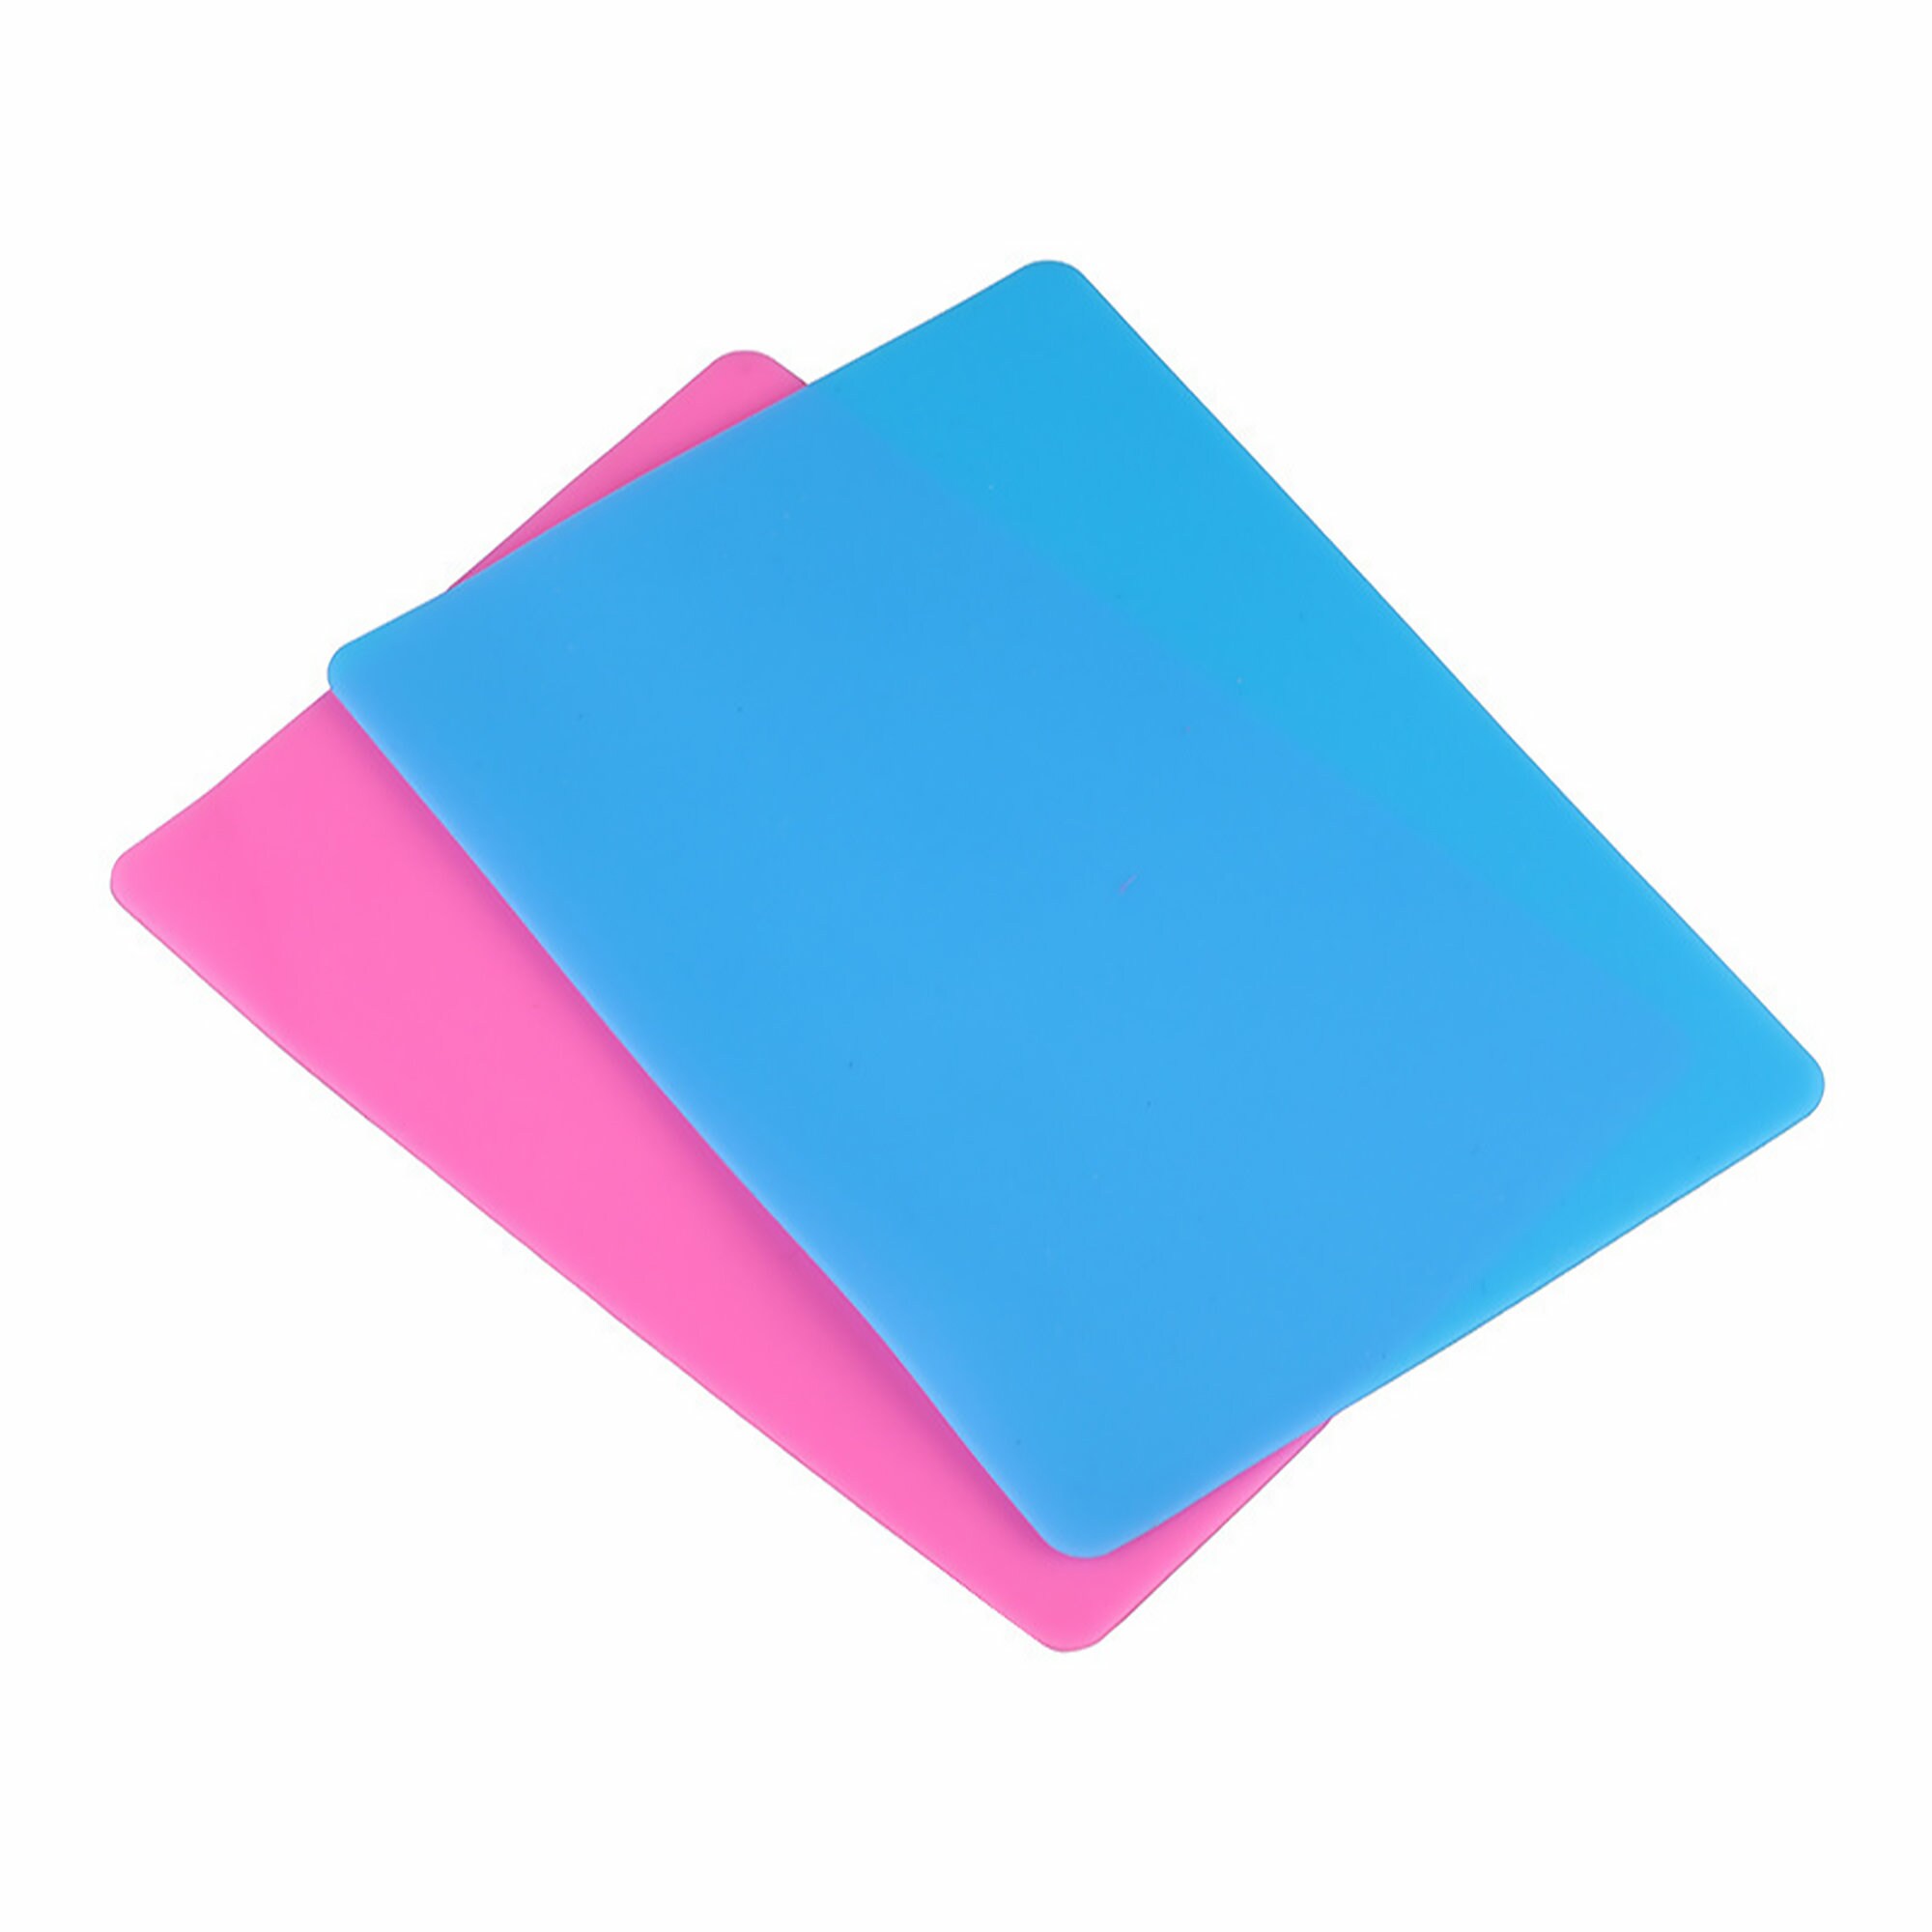 24x16x2 Silicone Mold For Epoxy Resin - Large Board Mold